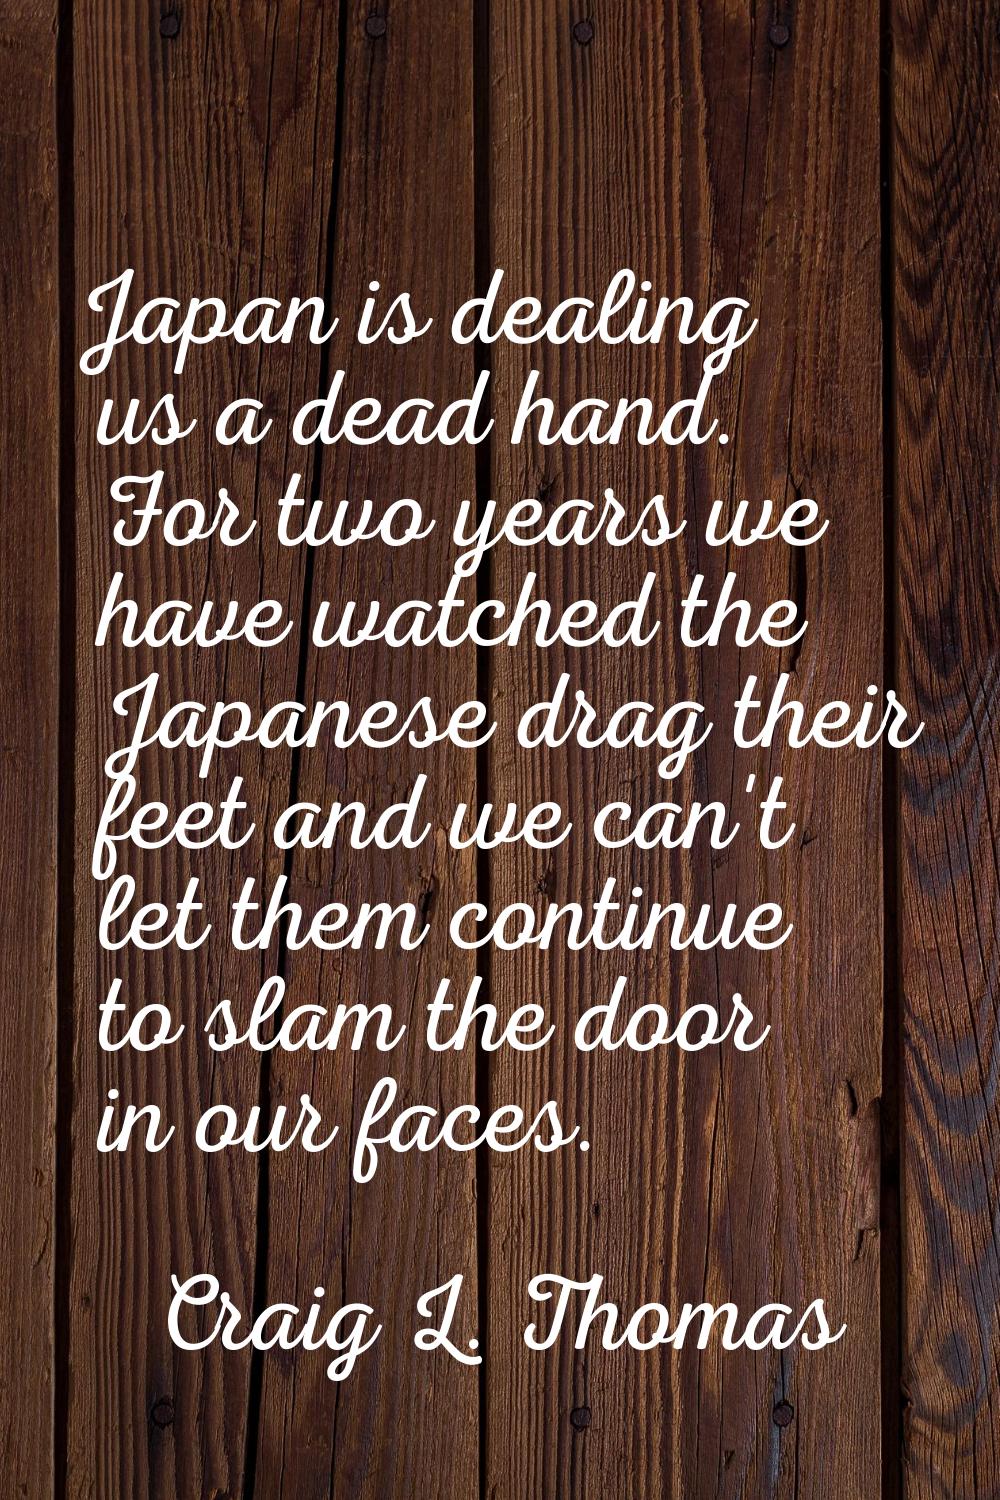 Japan is dealing us a dead hand. For two years we have watched the Japanese drag their feet and we 